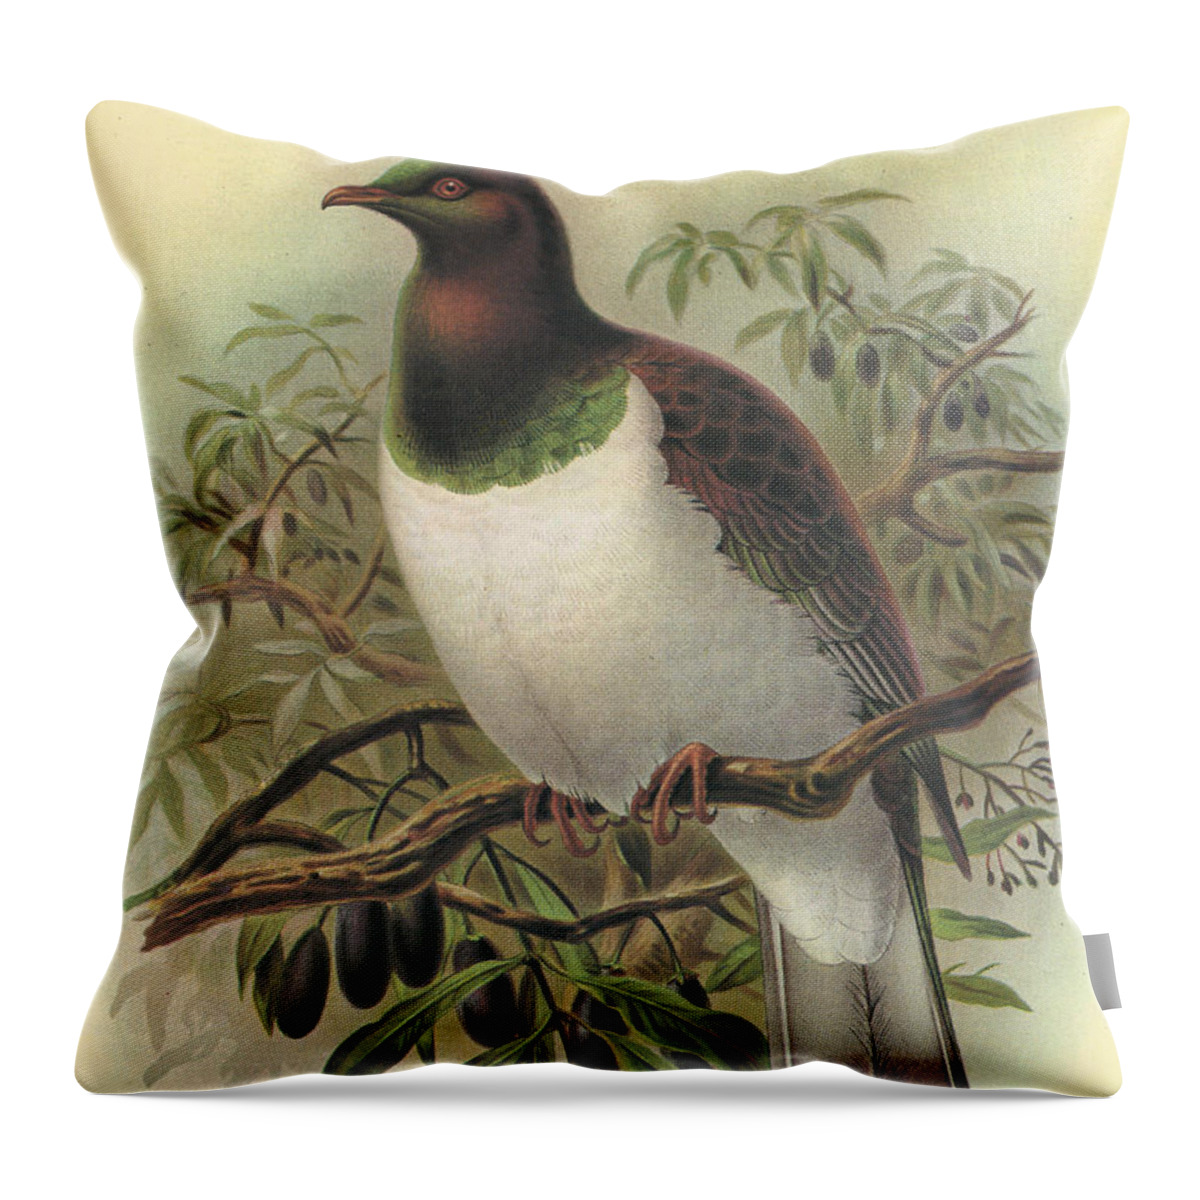 New Zealand Pigeon Throw Pillow featuring the painting New Zealand Pigeon by Dreyer Wildlife Print Collections 